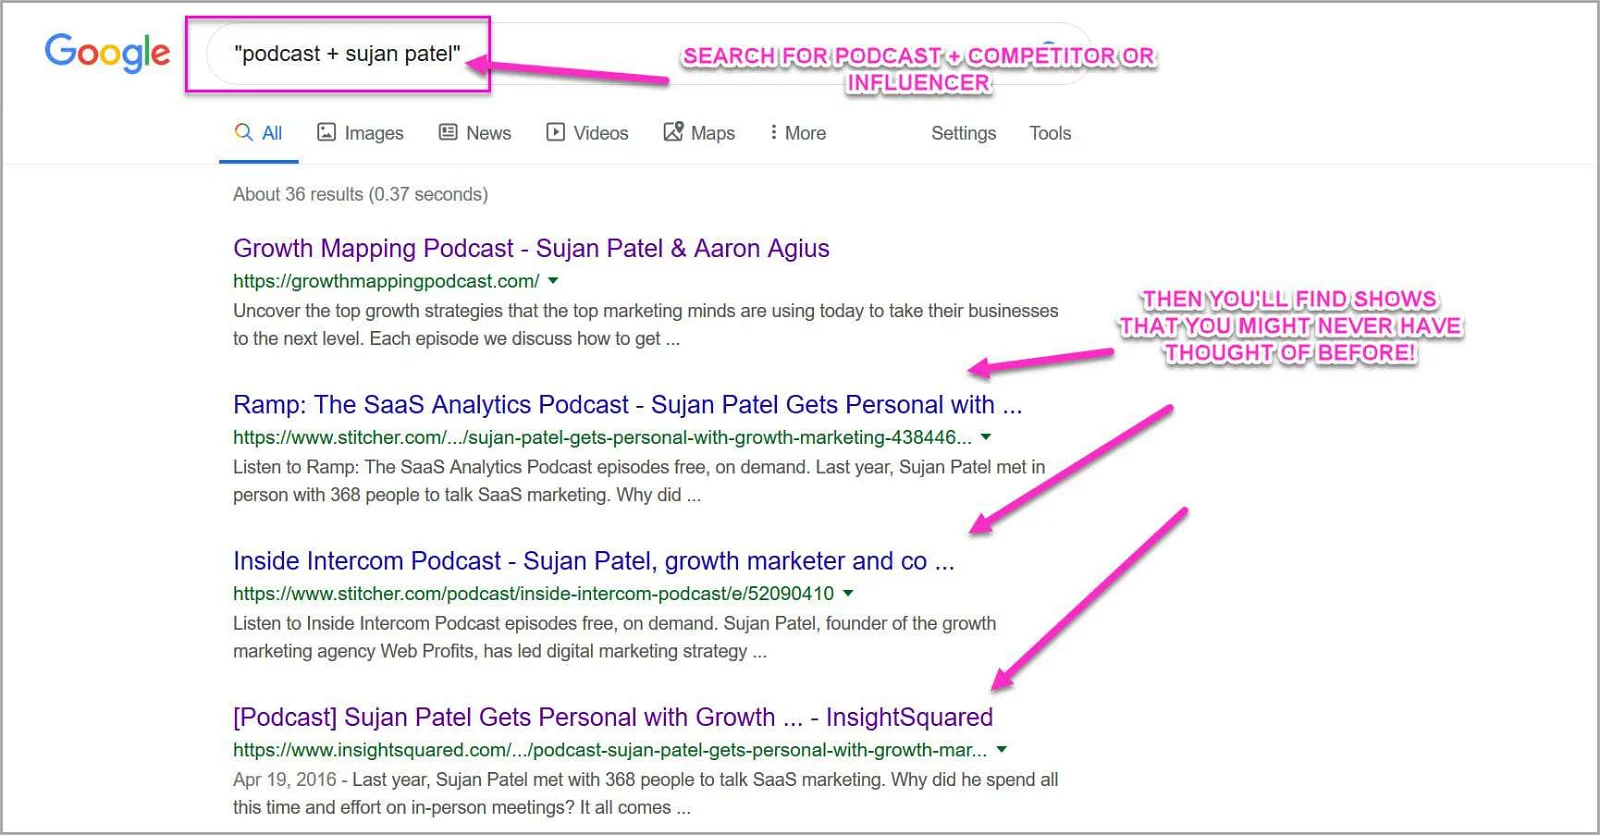 Search for competitors podcast appearances, so you can reverse engineer them